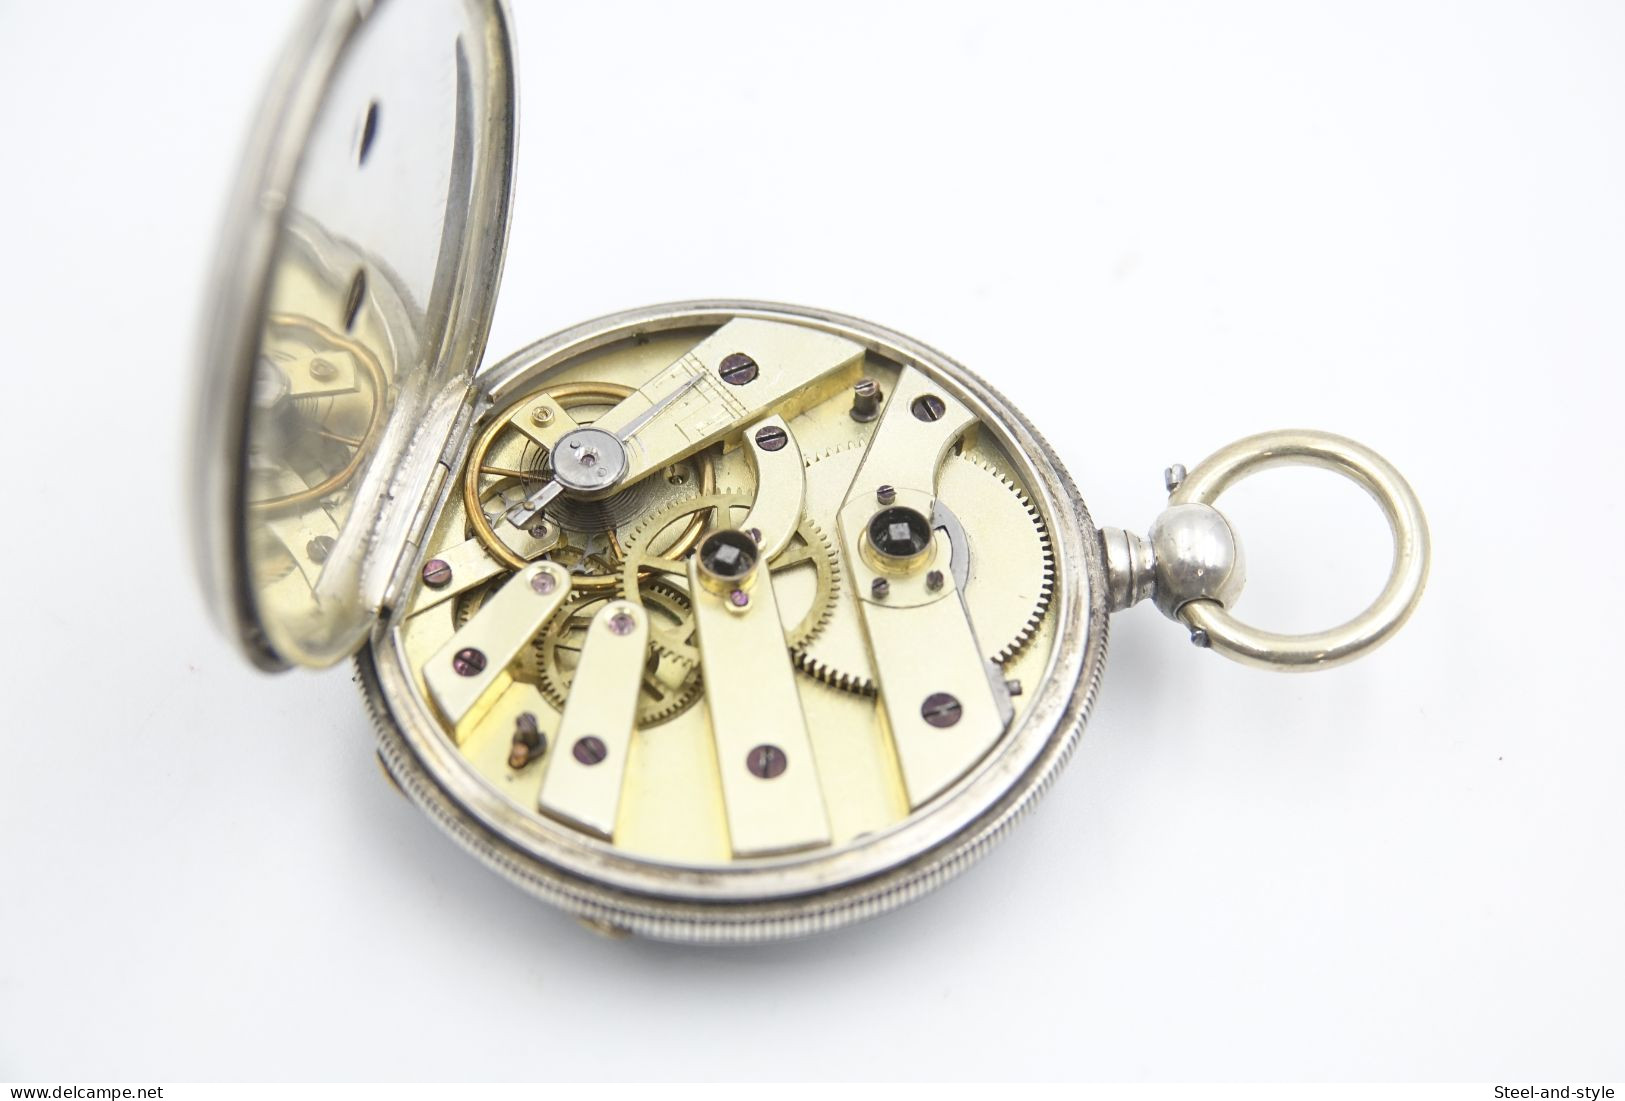 Watches : POCKET WATCH SOLID SILVER Key Winding Wide Dial Open Face 1880-900's - Original - Running - Montres Gousset